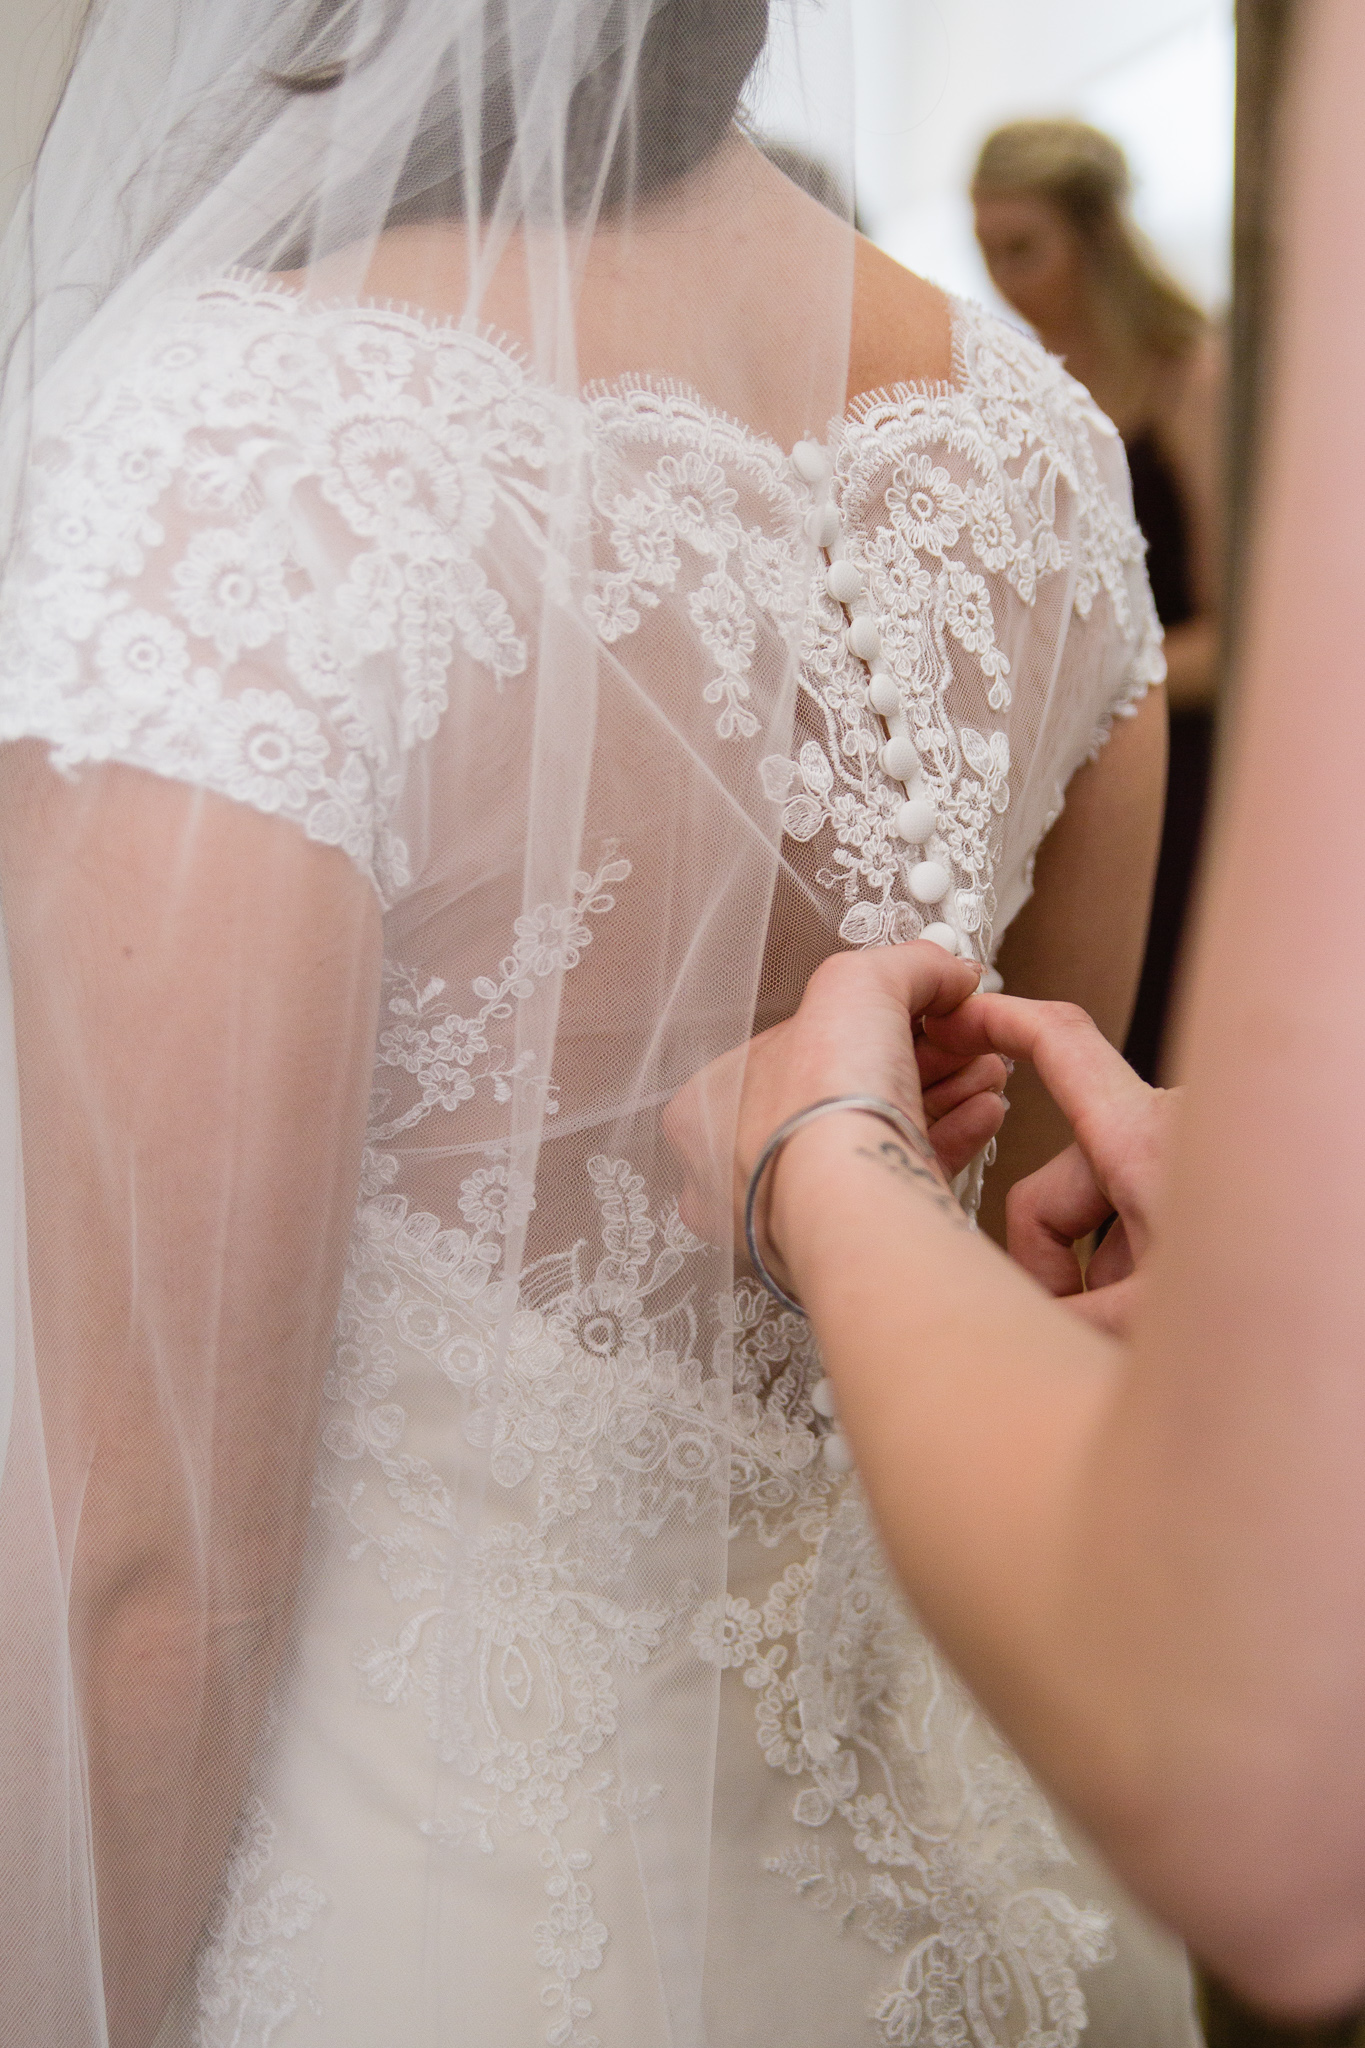 Bride's mother buttoning up her dress while getting ready for her wedding by Arizona wedding photographer PMA Photography.